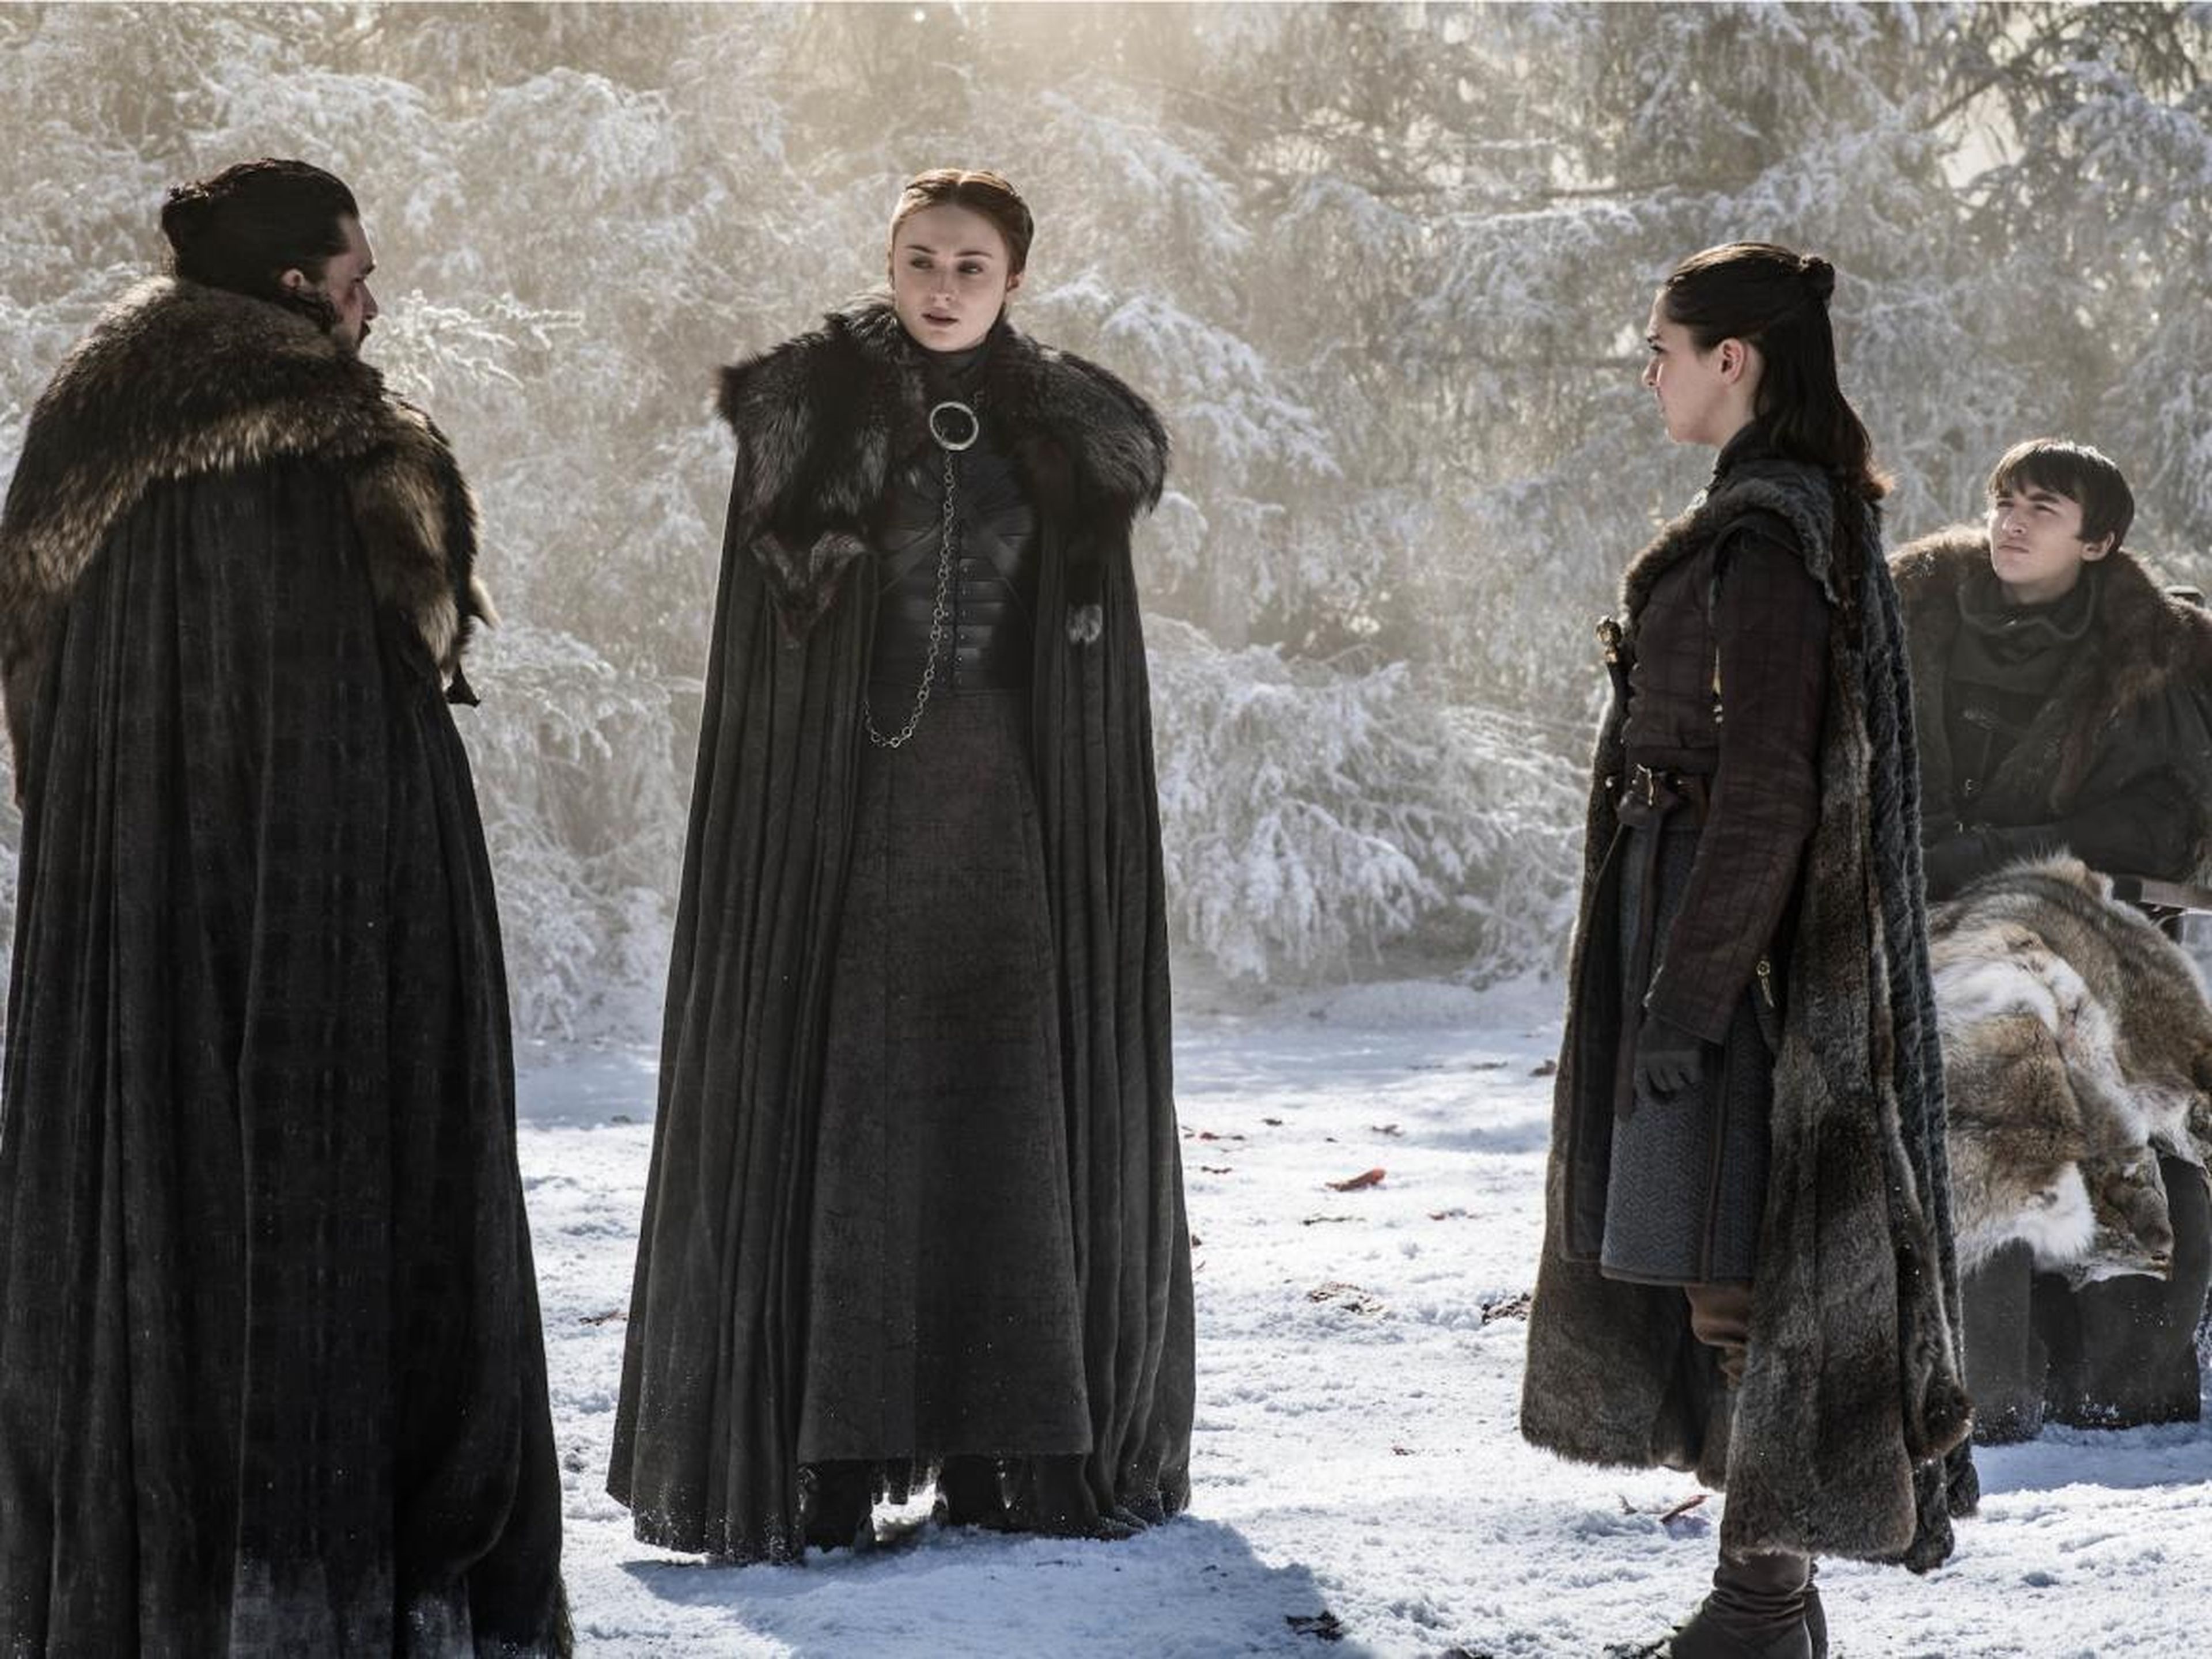 All the remaining Starks together in the godswood of Winterfell.